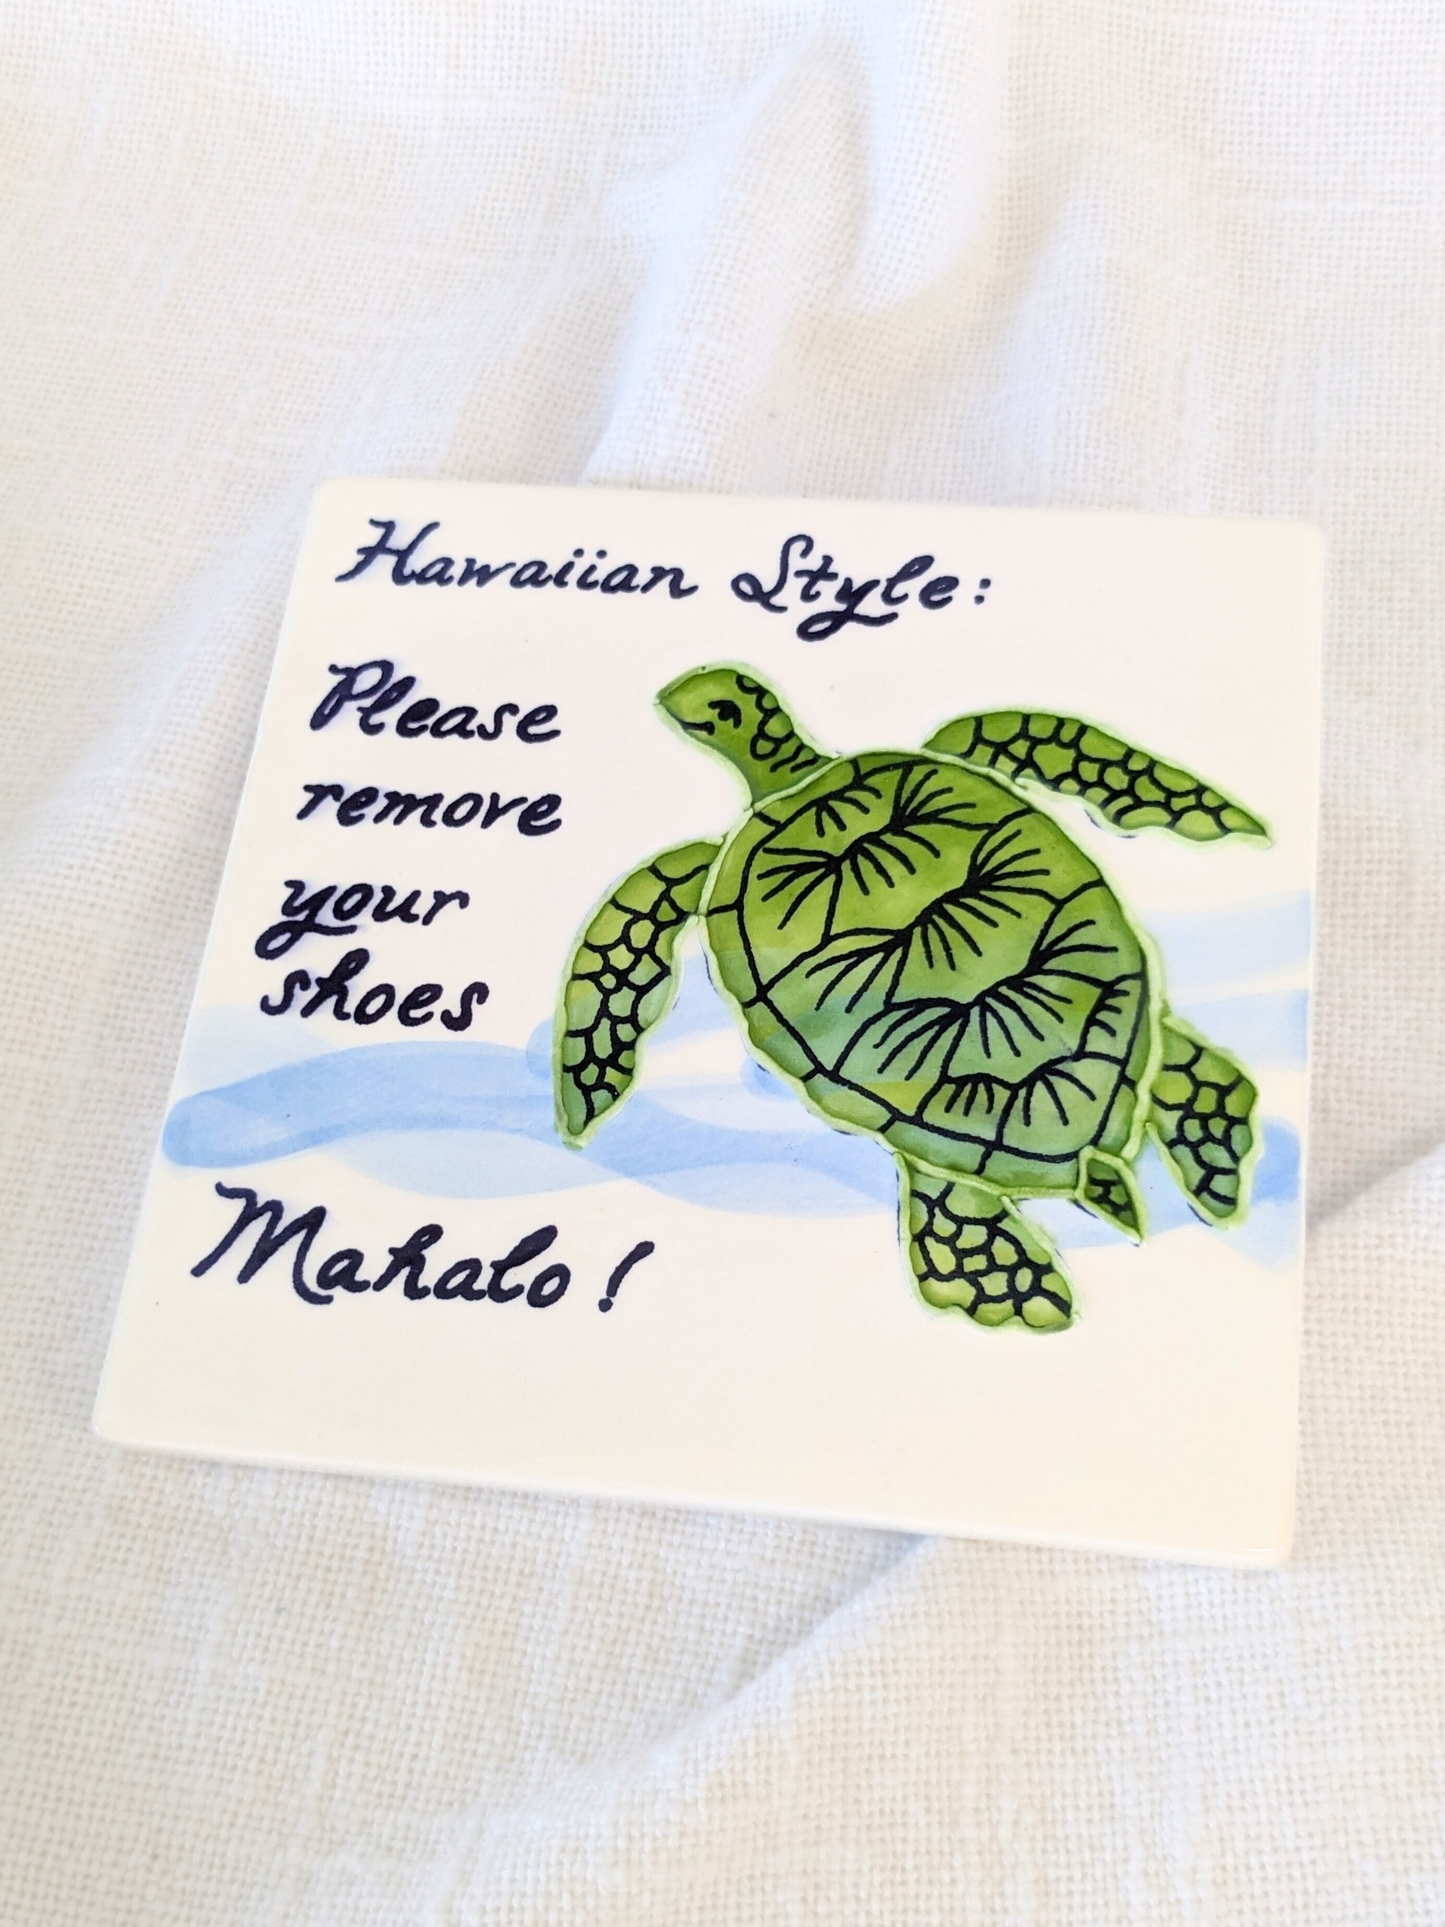 Embossed Turtle Remove Shoes Tile 6"